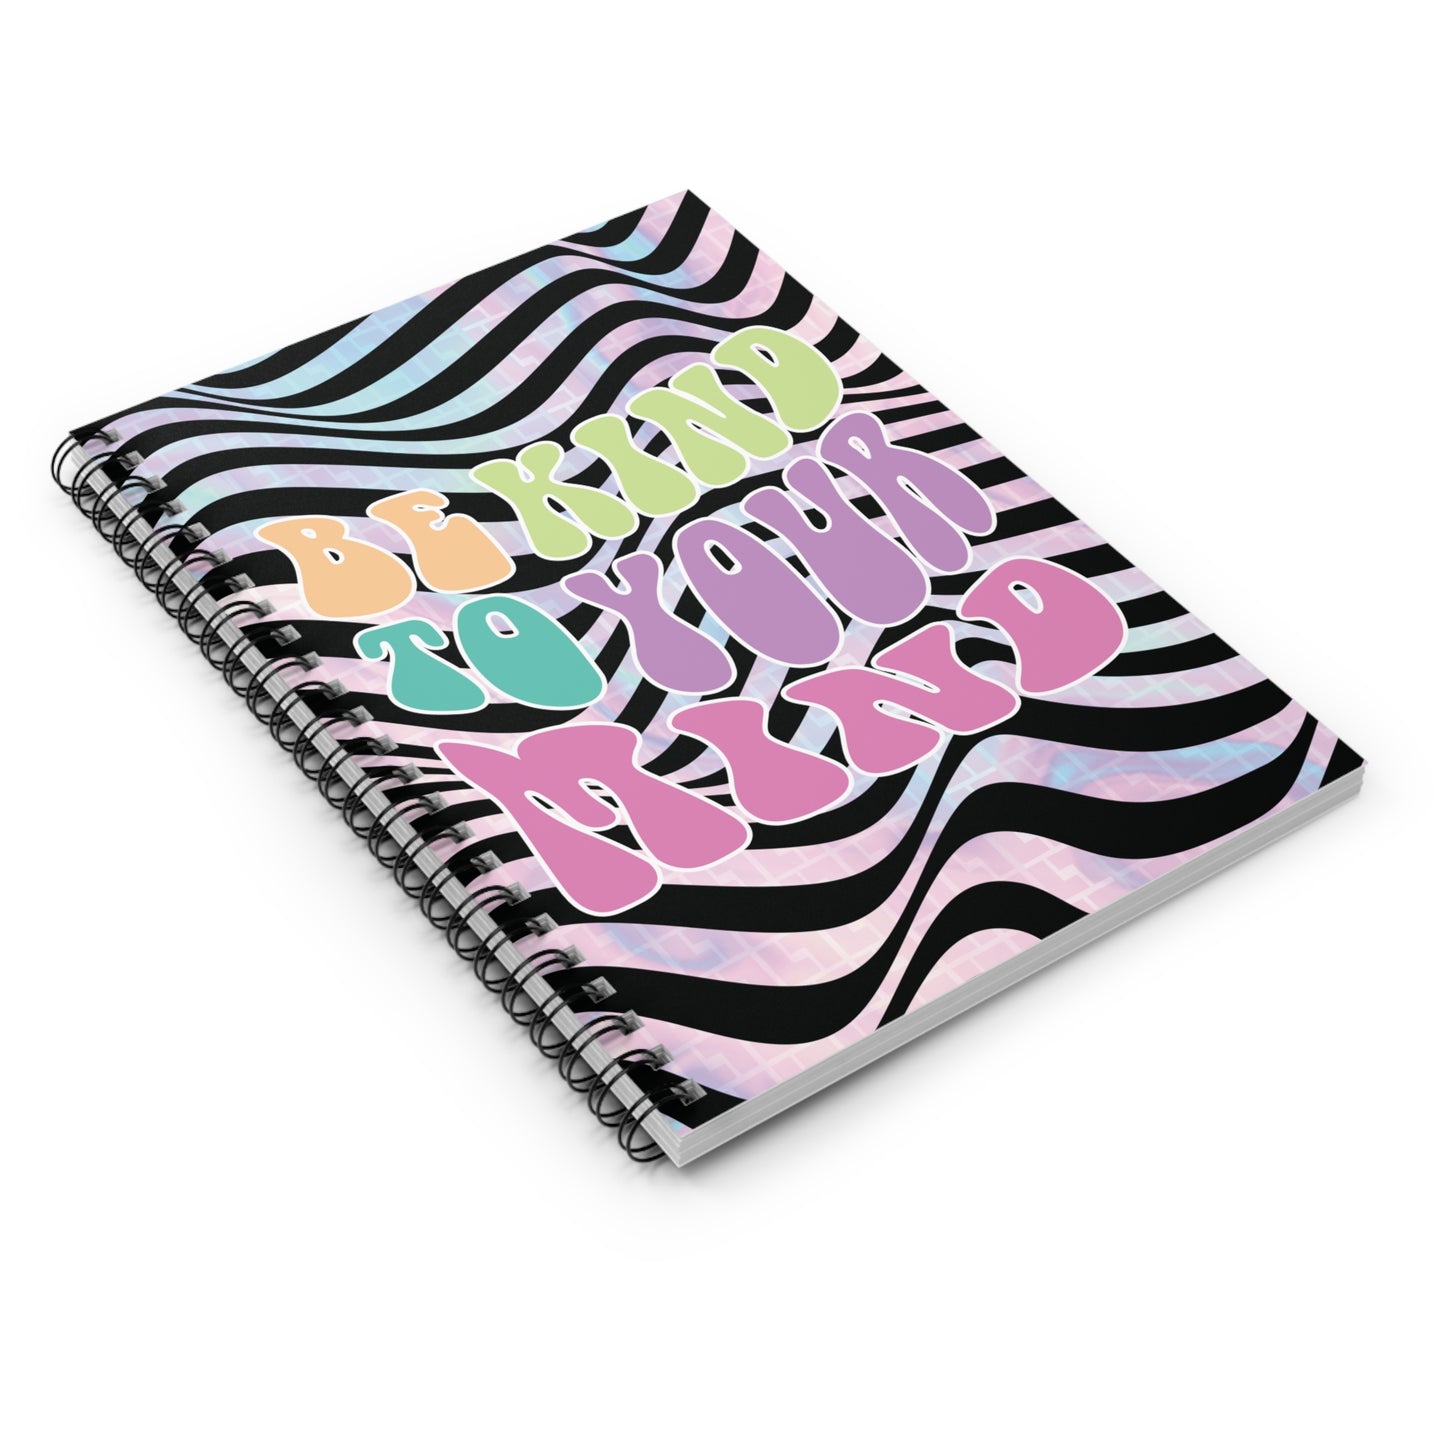 Be Kind Spiral Notebook | ADHD